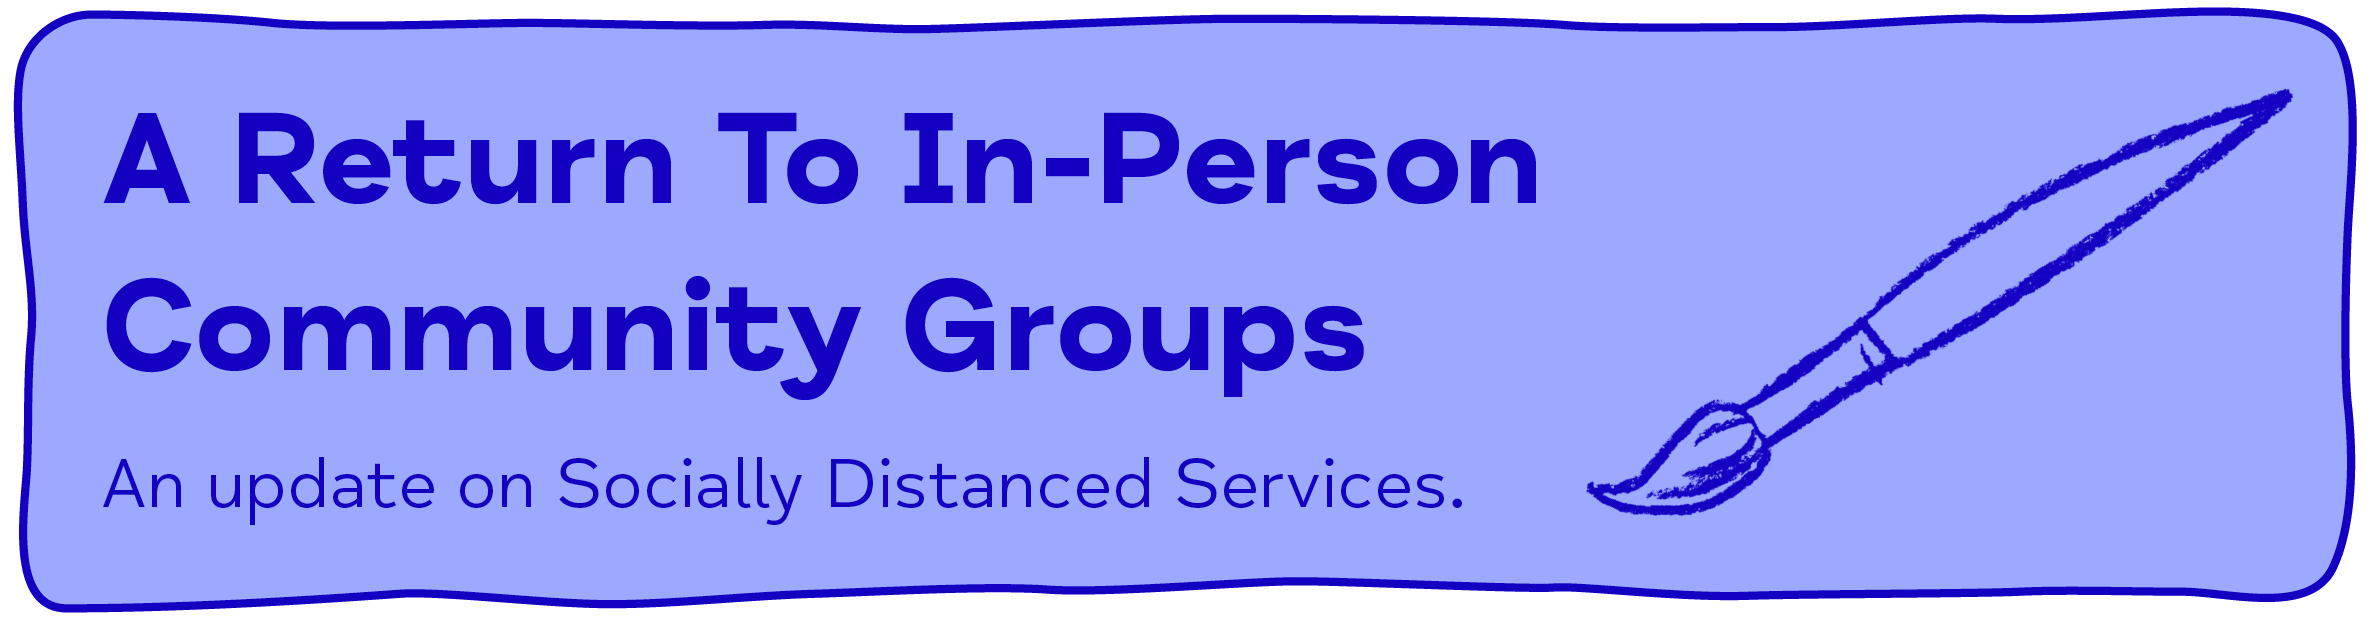 A Return To In-Person Community Groups An update on Socially Distanced Services.